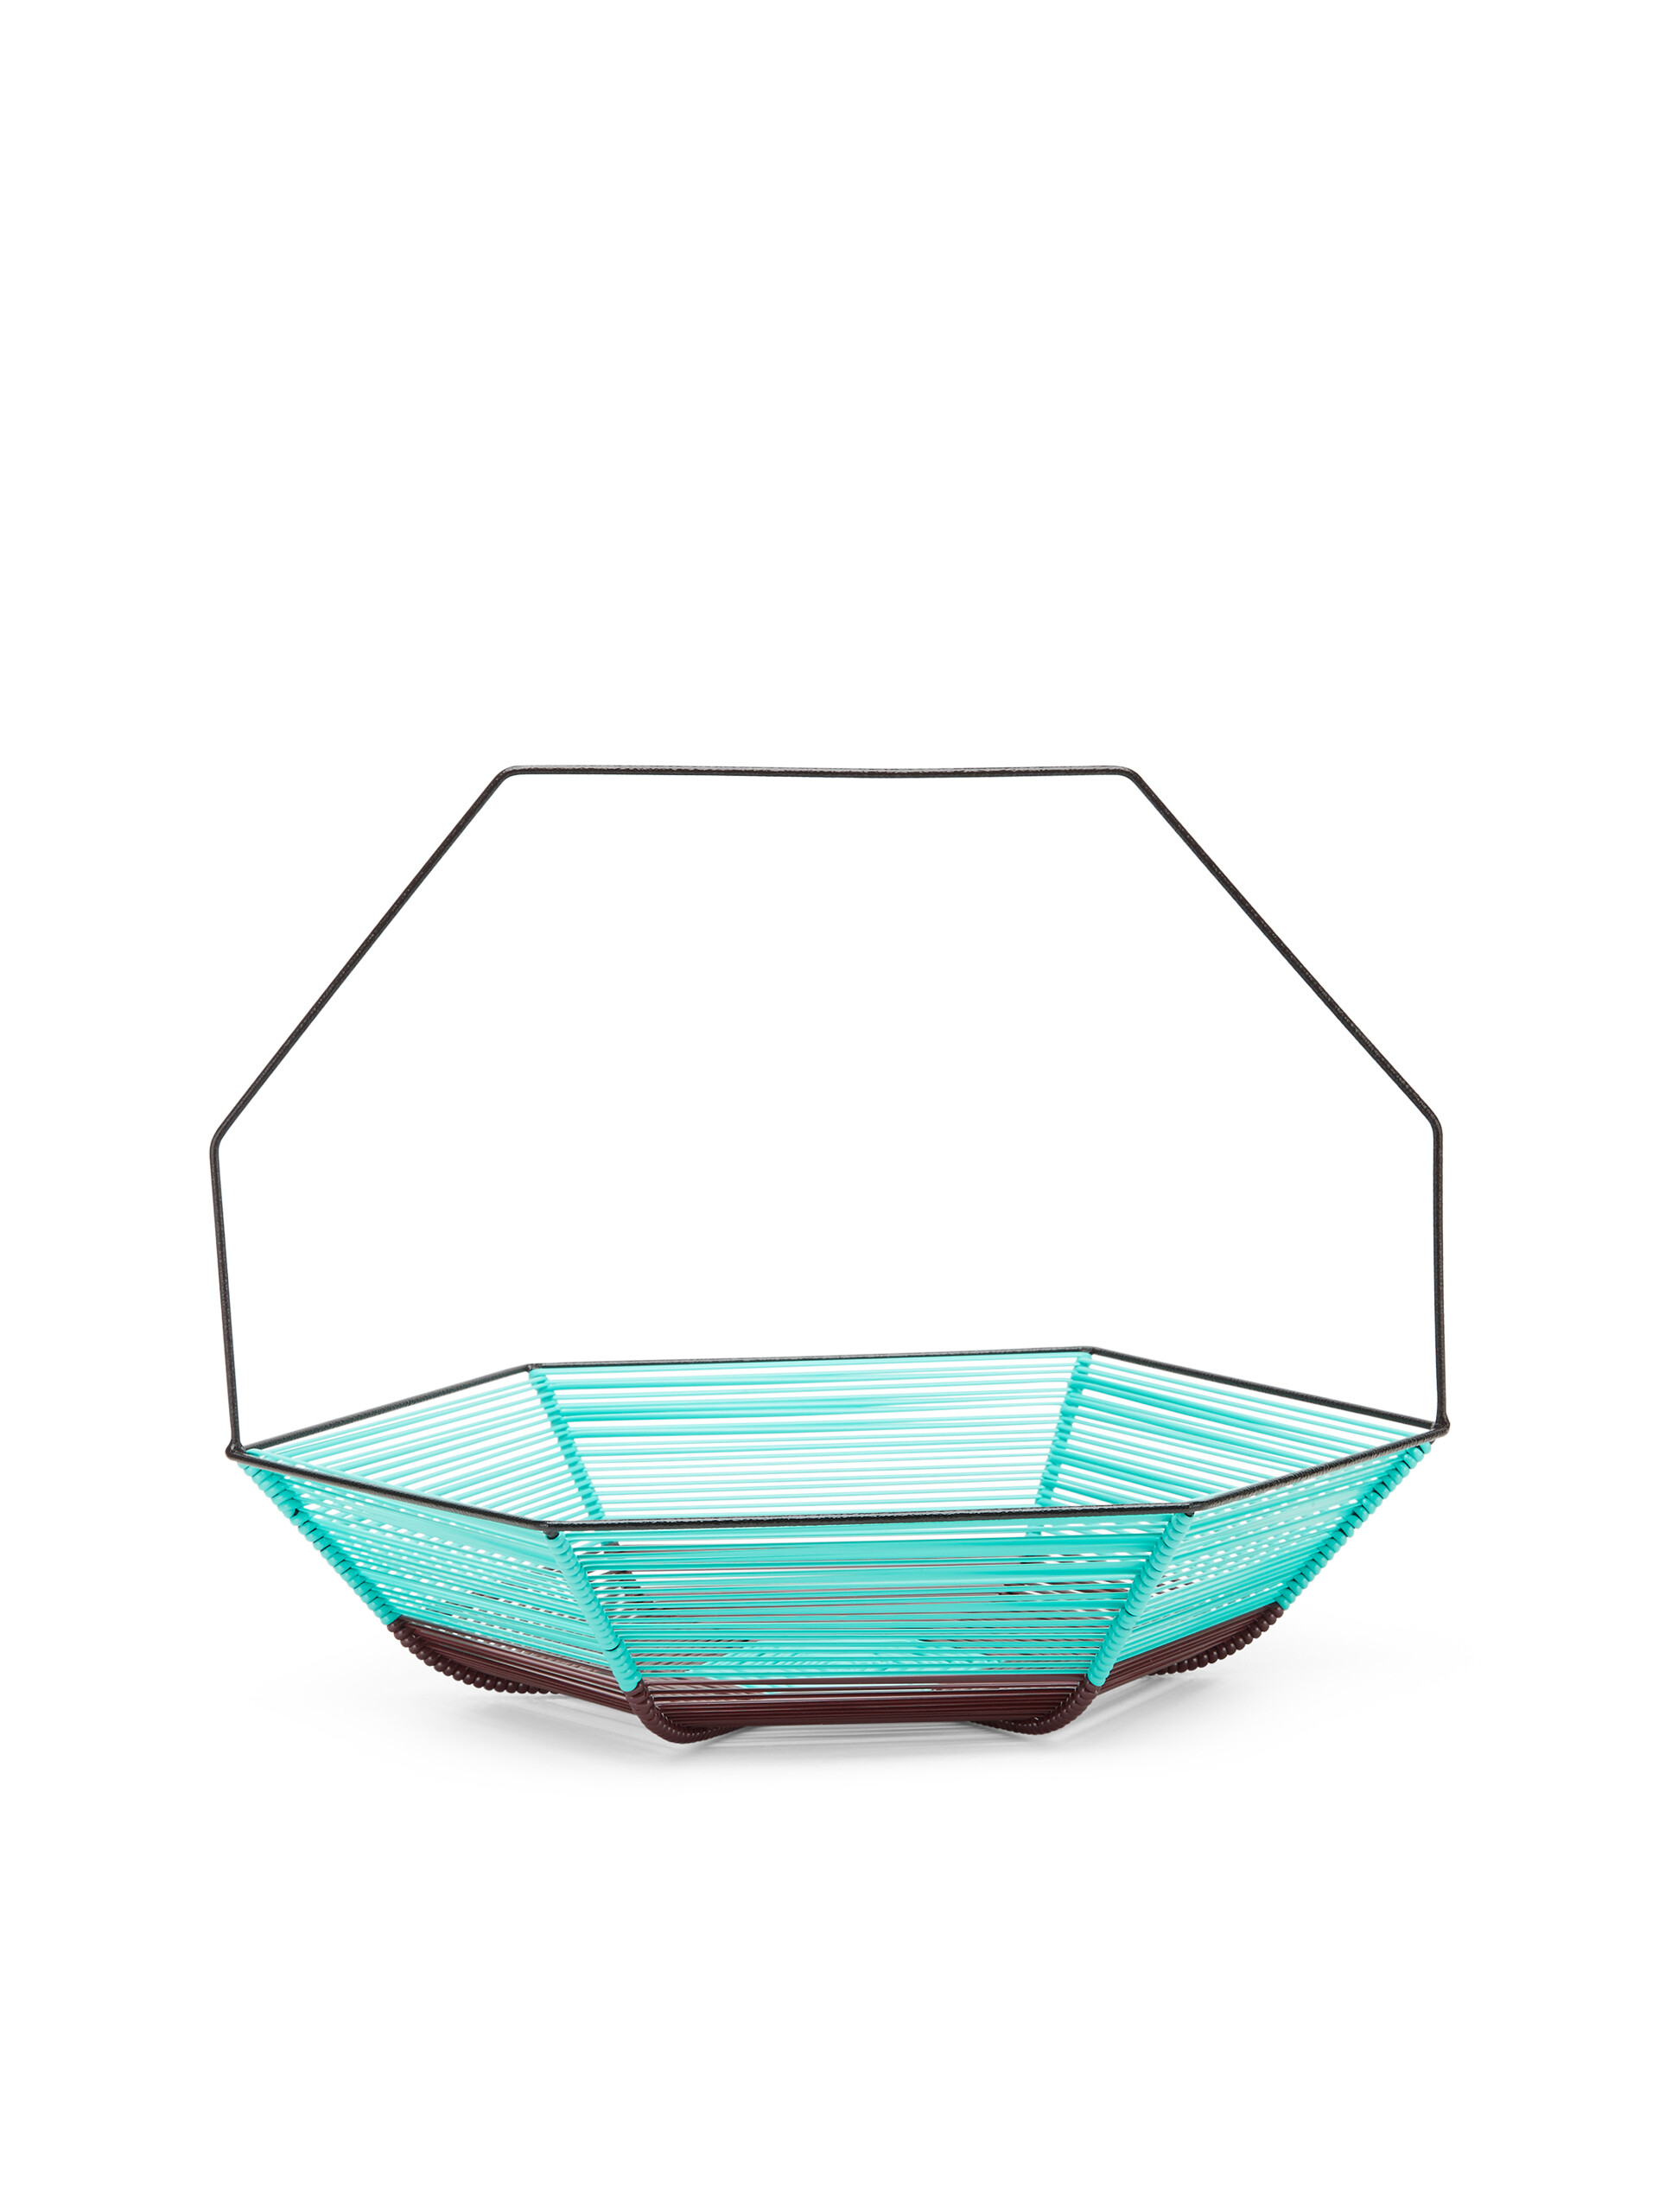 MARNI MARKET hexagonal turquoise and brown fruit holder - Accessories - Image 3